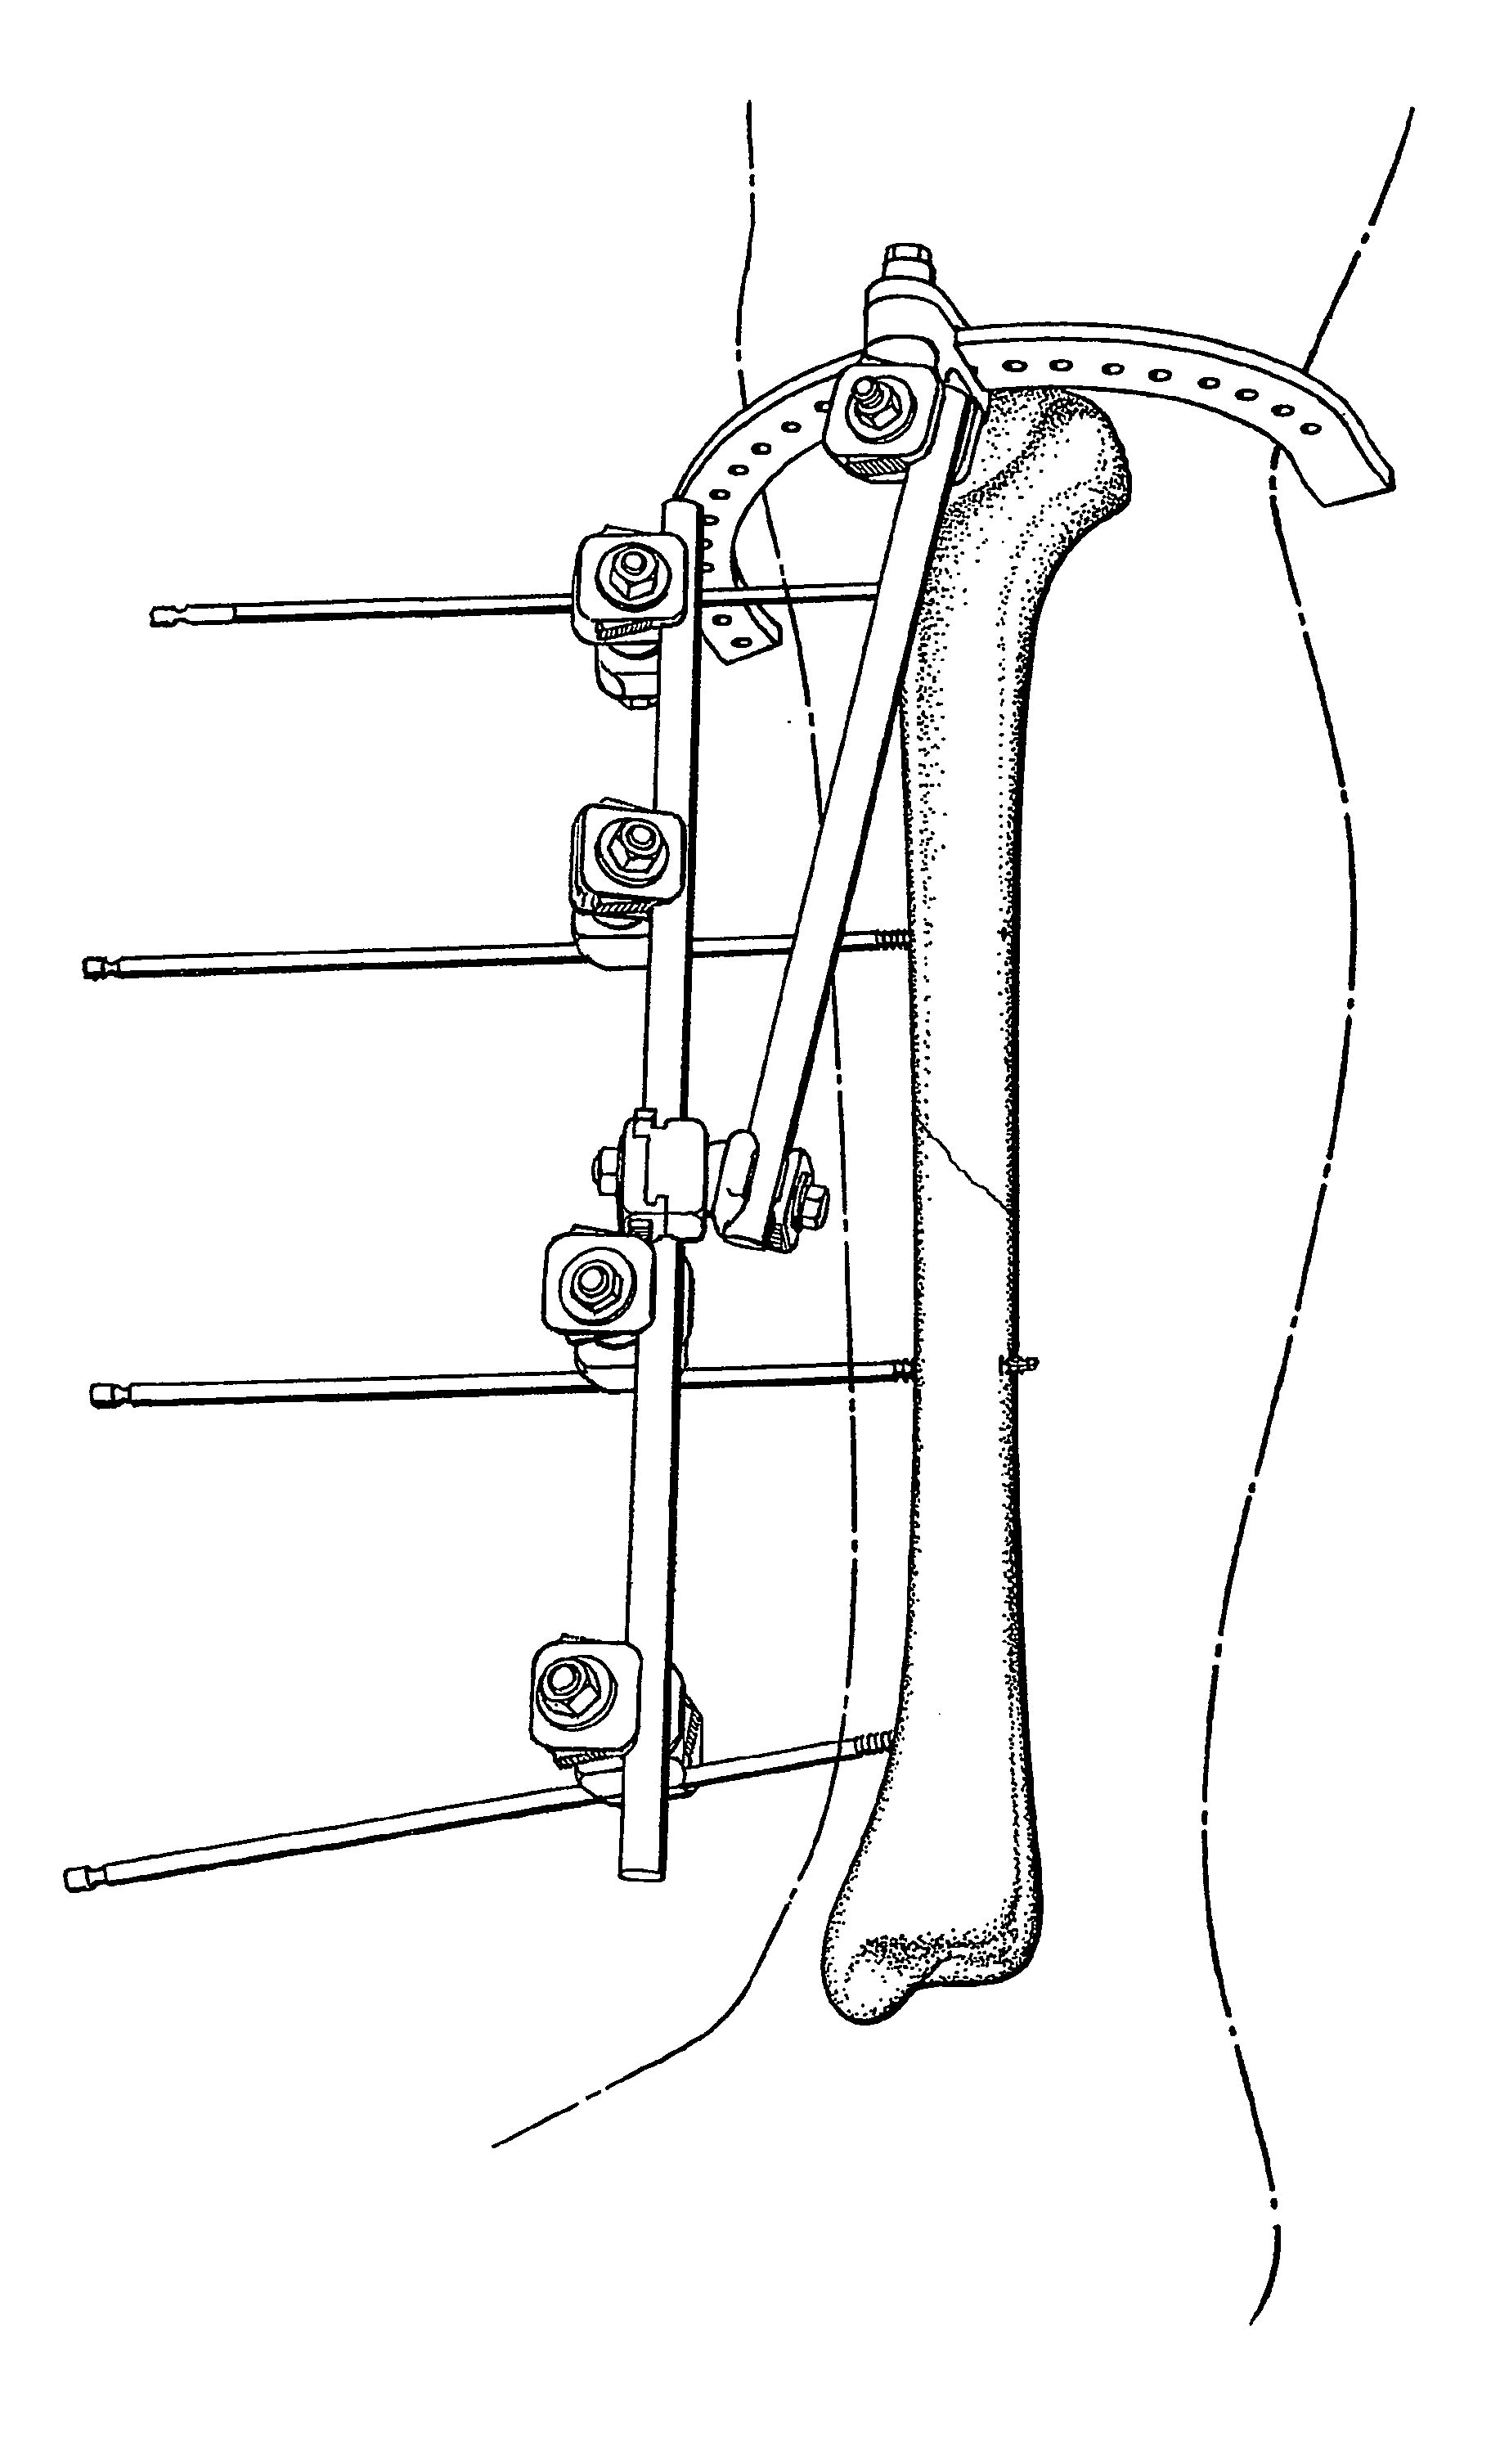 Device and methods for placing external fixation elements